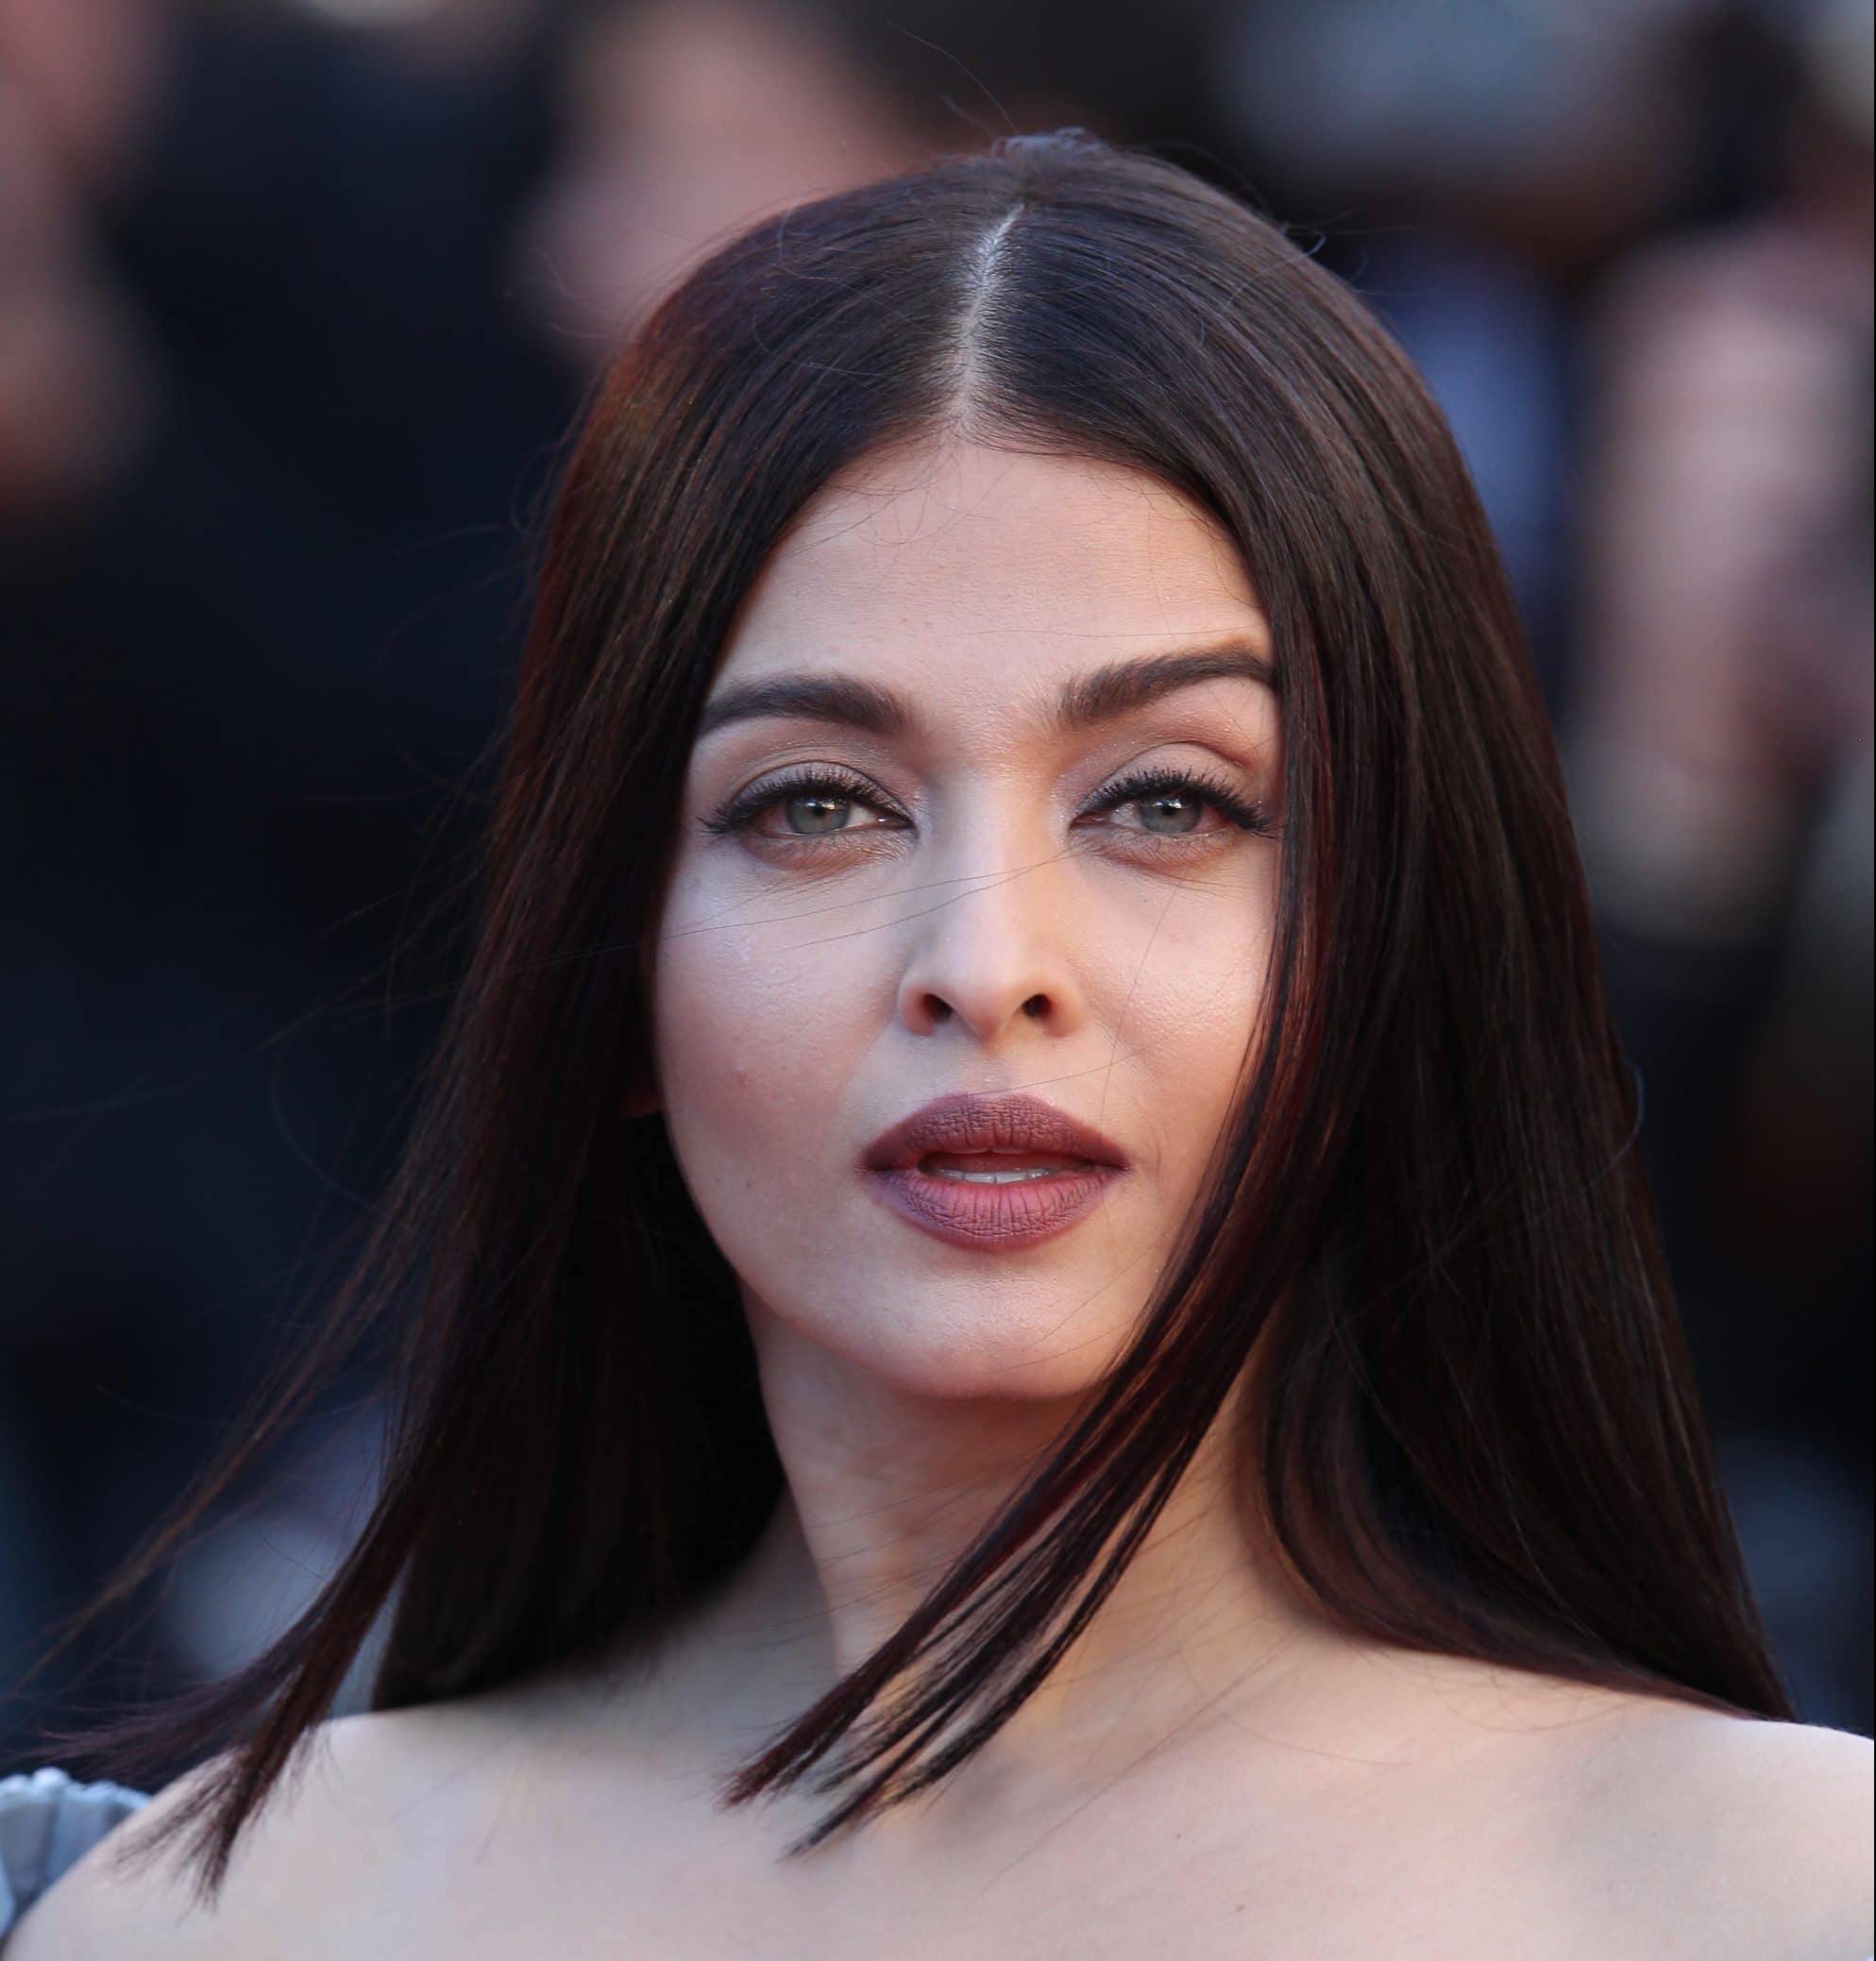 Aishwarya Rai Bachchan: The versatile actress who made her mark in Bollywood with her talent and consistency.